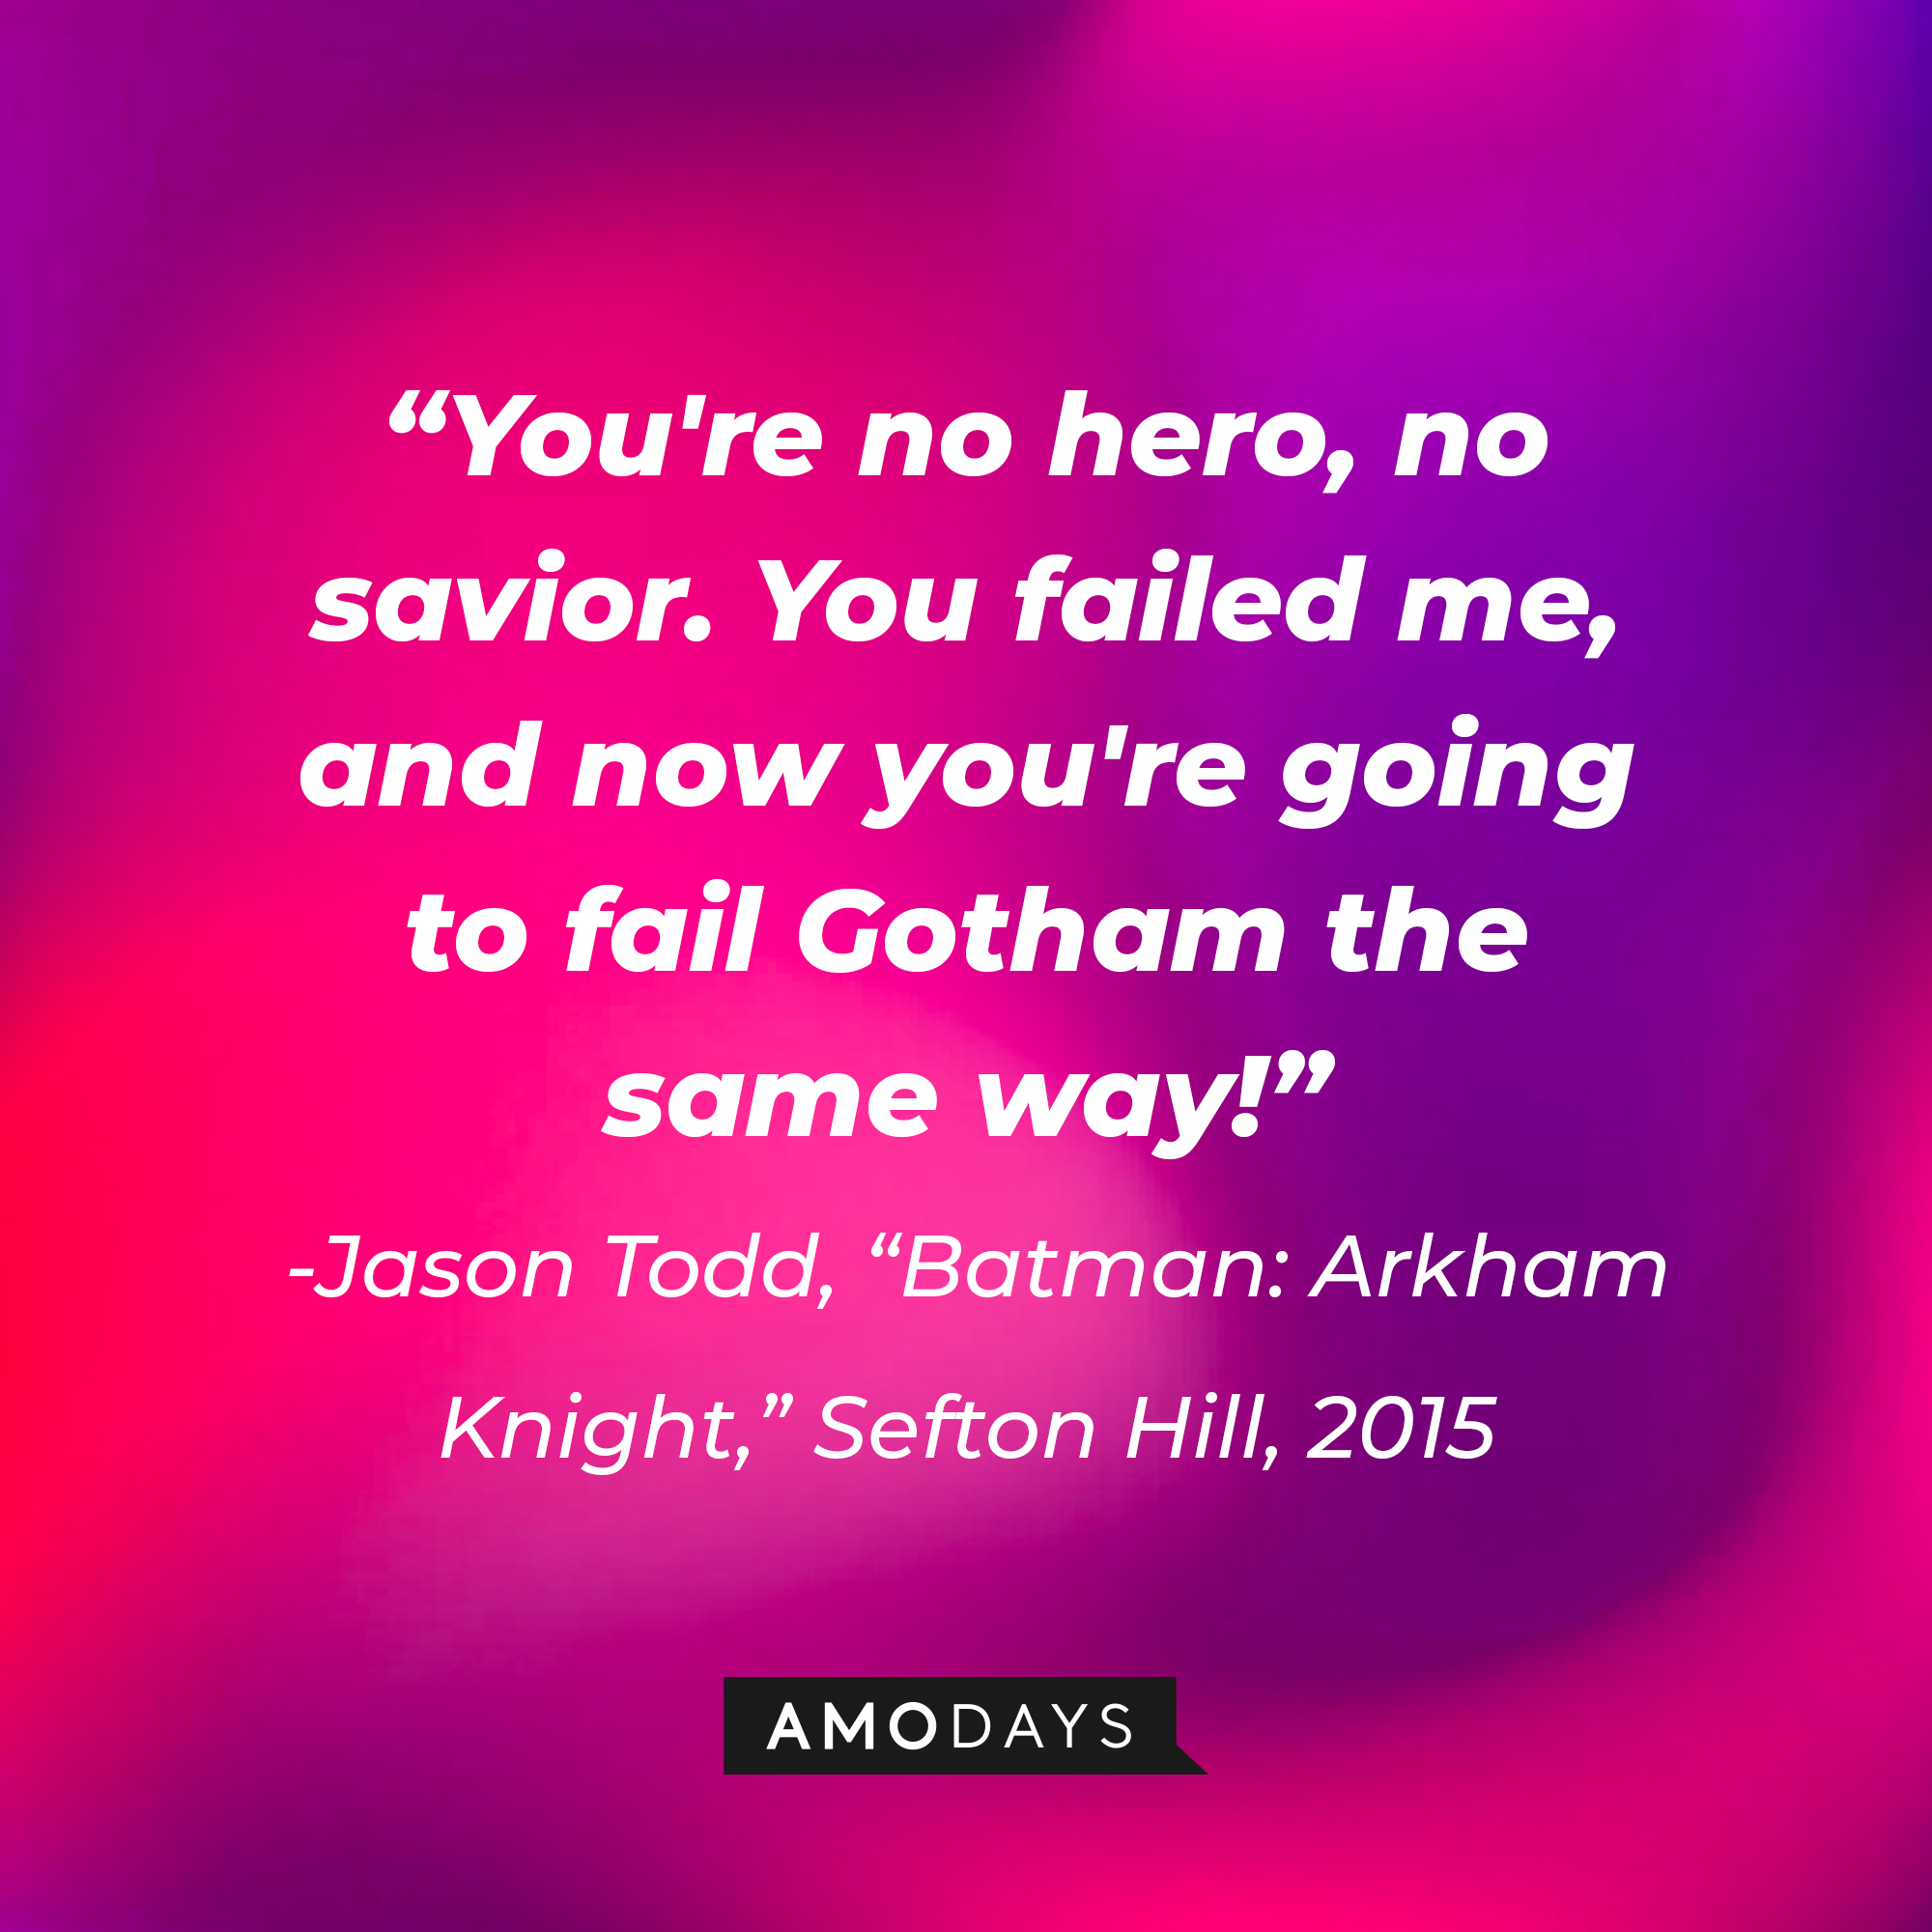 A quote from Jason Todd in "Batman: Arkham Knight," Sefton Hill, 2015: "You're no hero, no savior. You failed me, and now you're going to fail Gotham the same way!" | Source: AmoDays